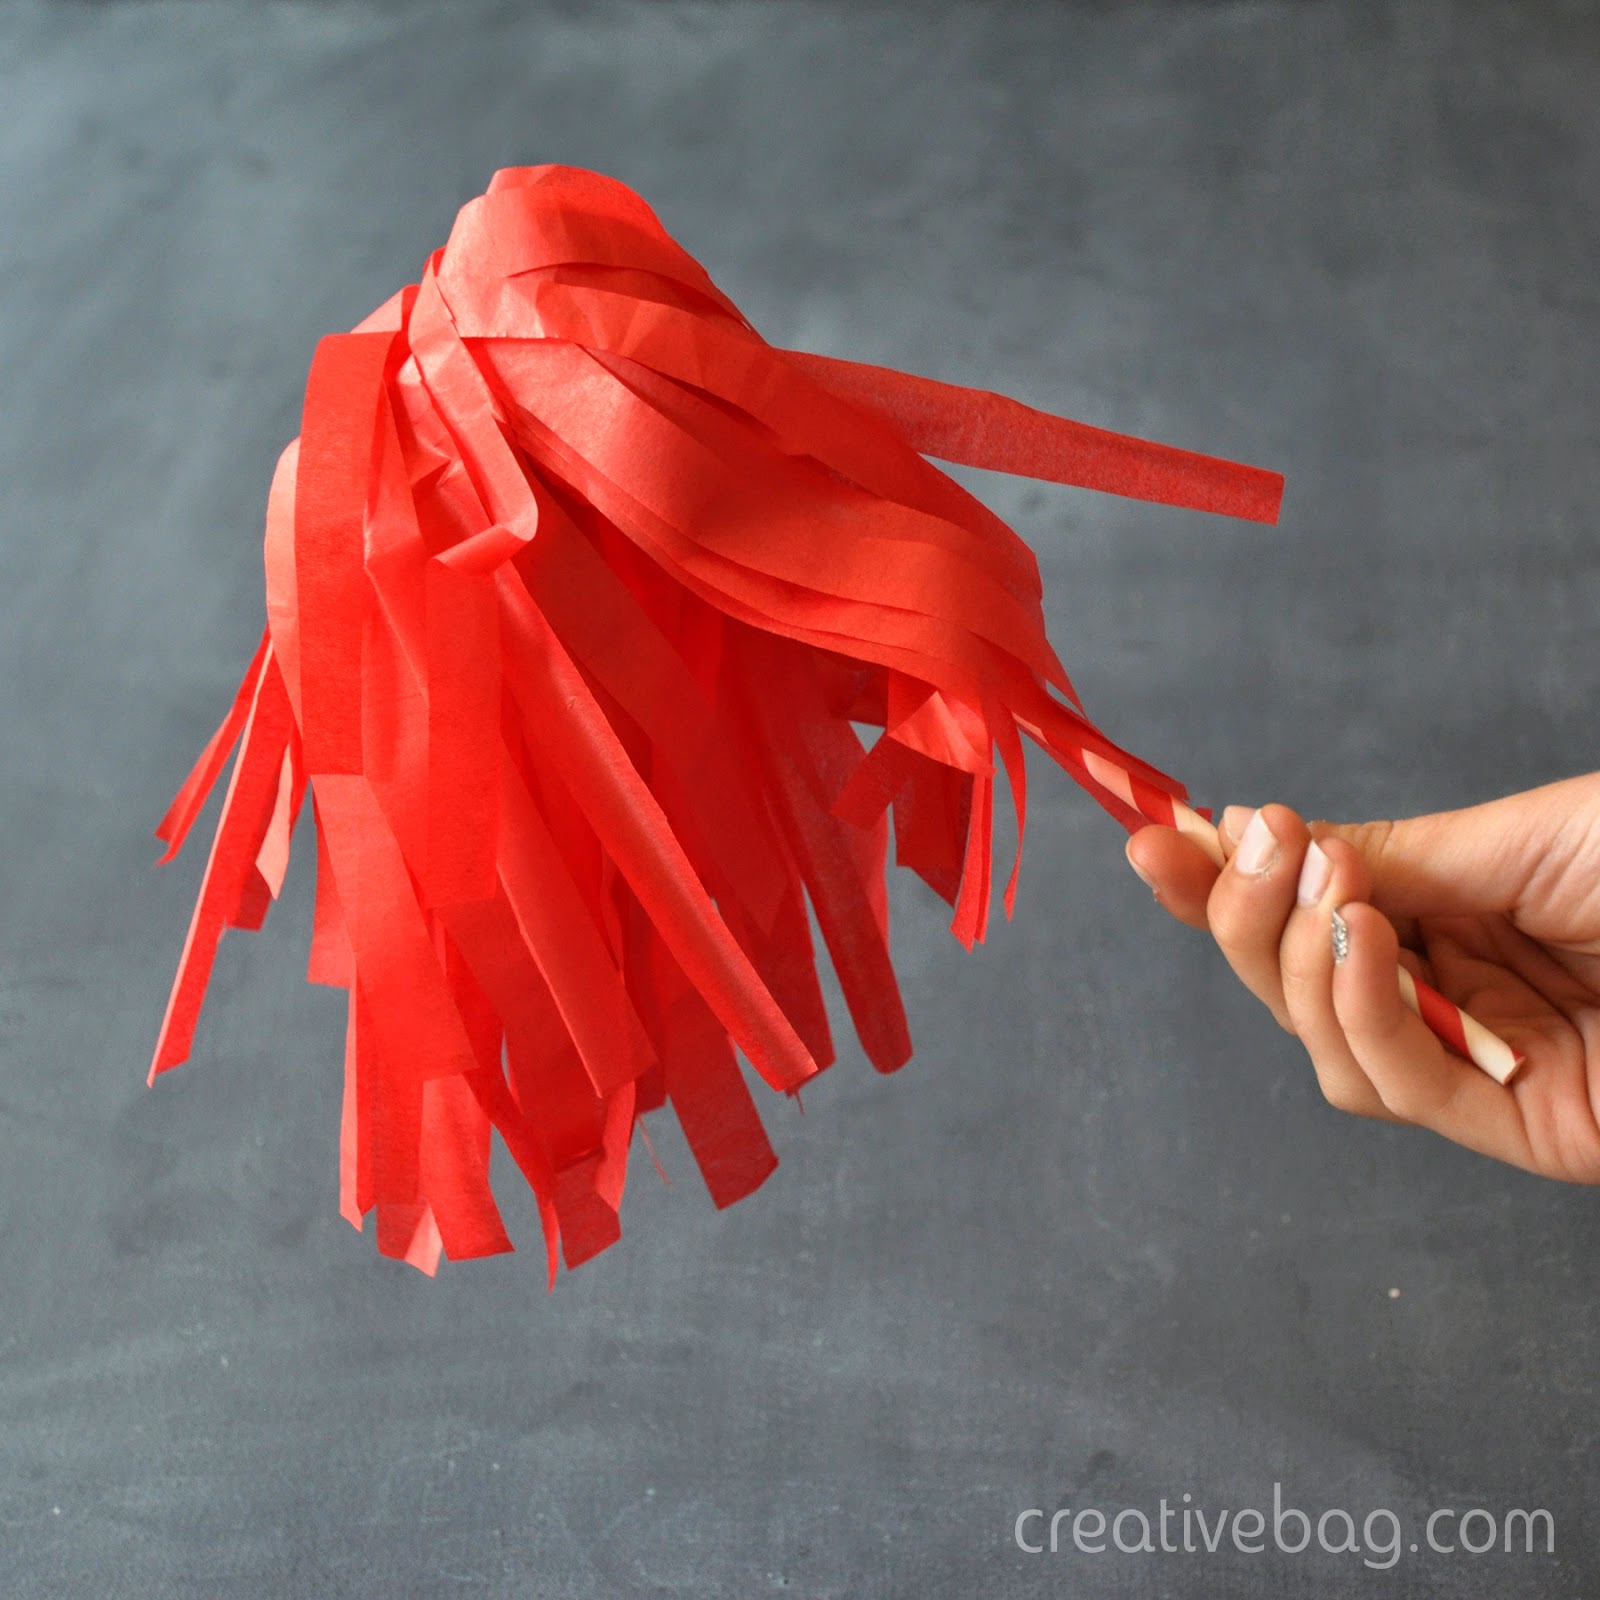 diy tissue paper tassel gift toppers by Lorrie Everitt from Creative Bag